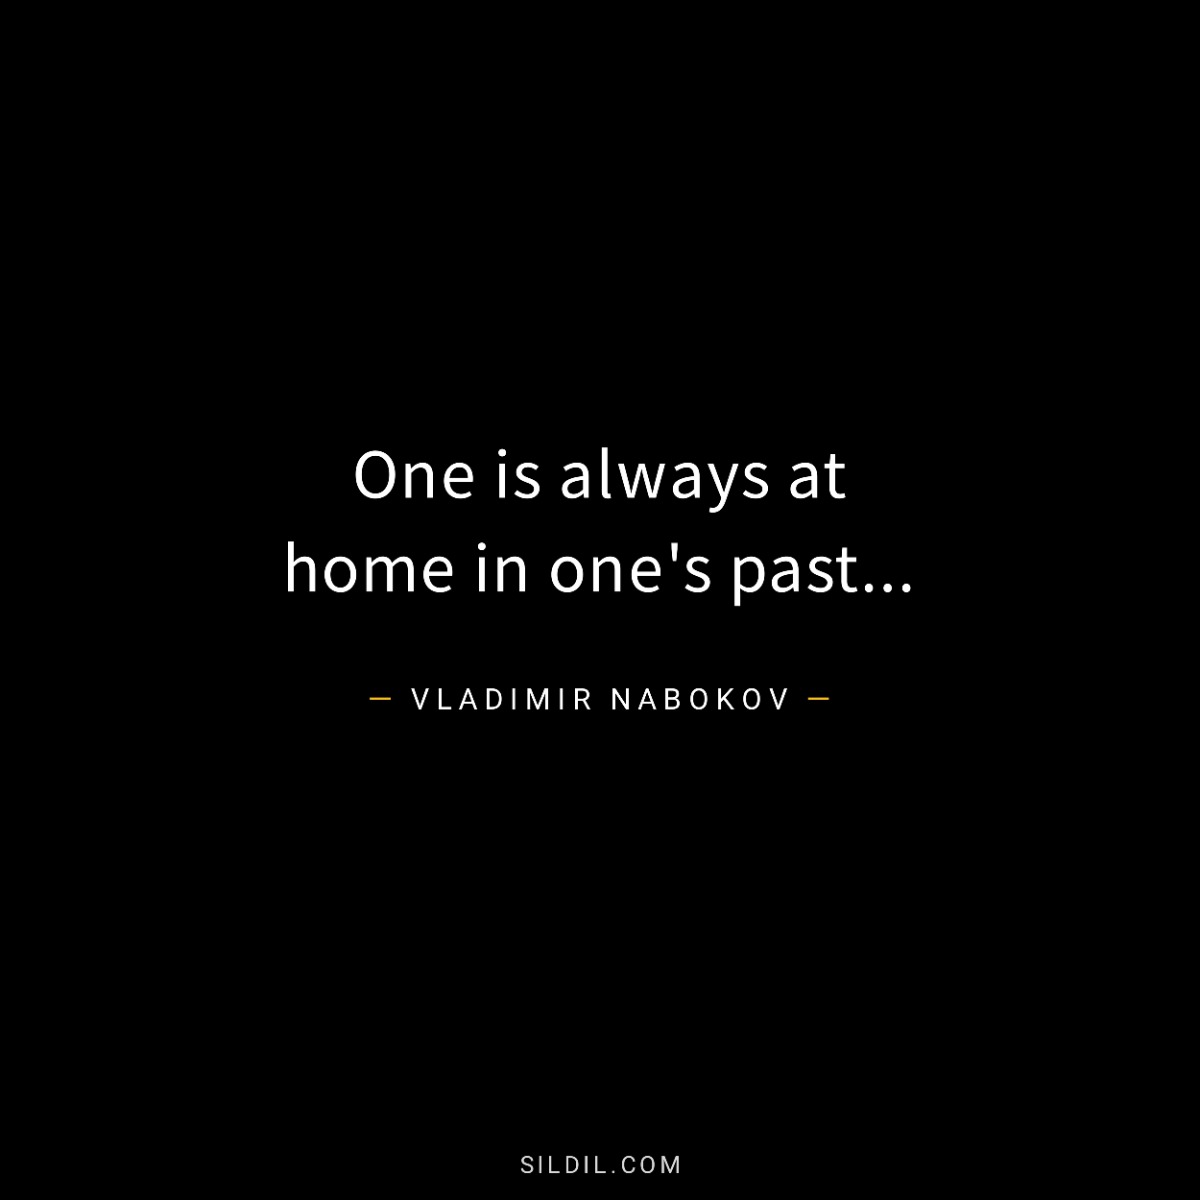 One is always at home in one's past...